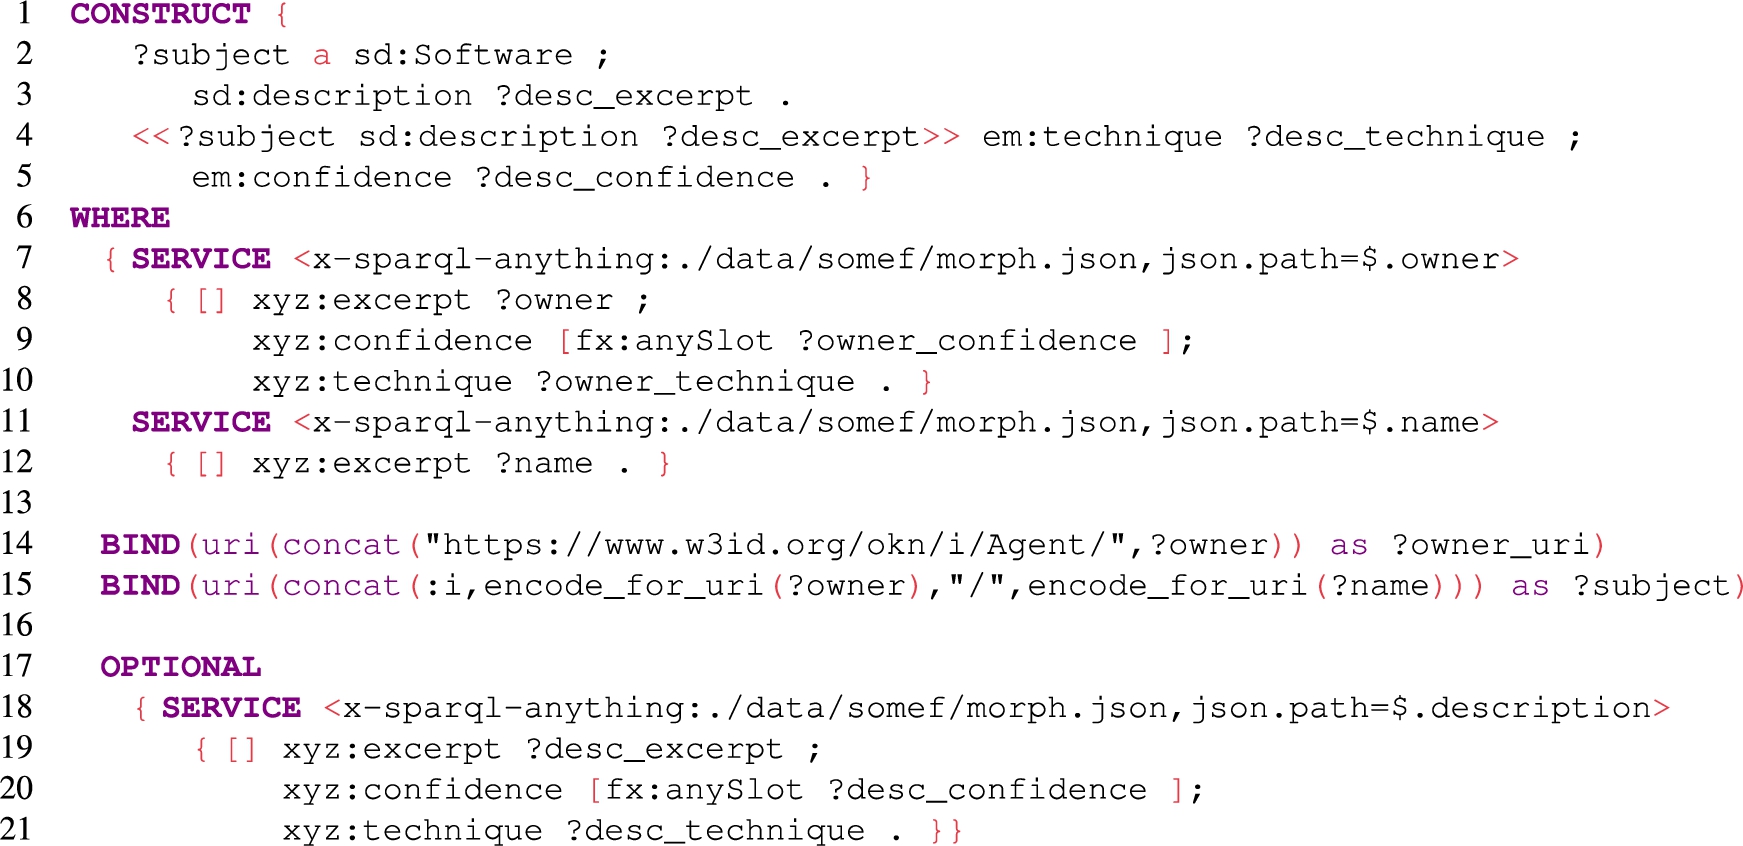 SPARQL-Anything snippet to create the RDF-star graph in Listing 10 from the JSON file in Listing 9